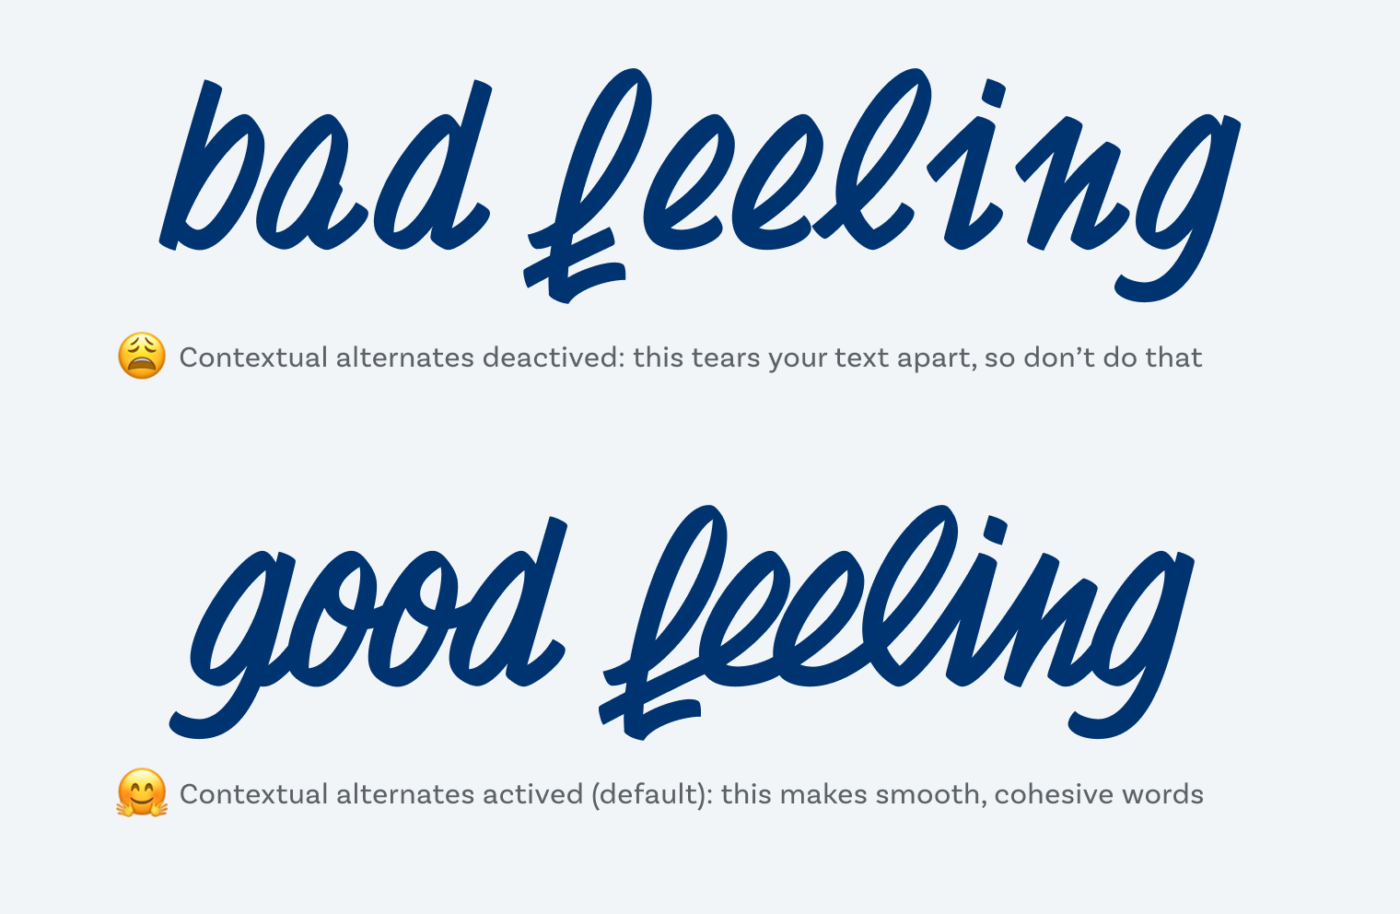 bad feeling: Contextual alternates deactived: this tears your text apart, so don’t do that. Good feeling: Contextual alternates actived (default): this makes smooth, cohesive words